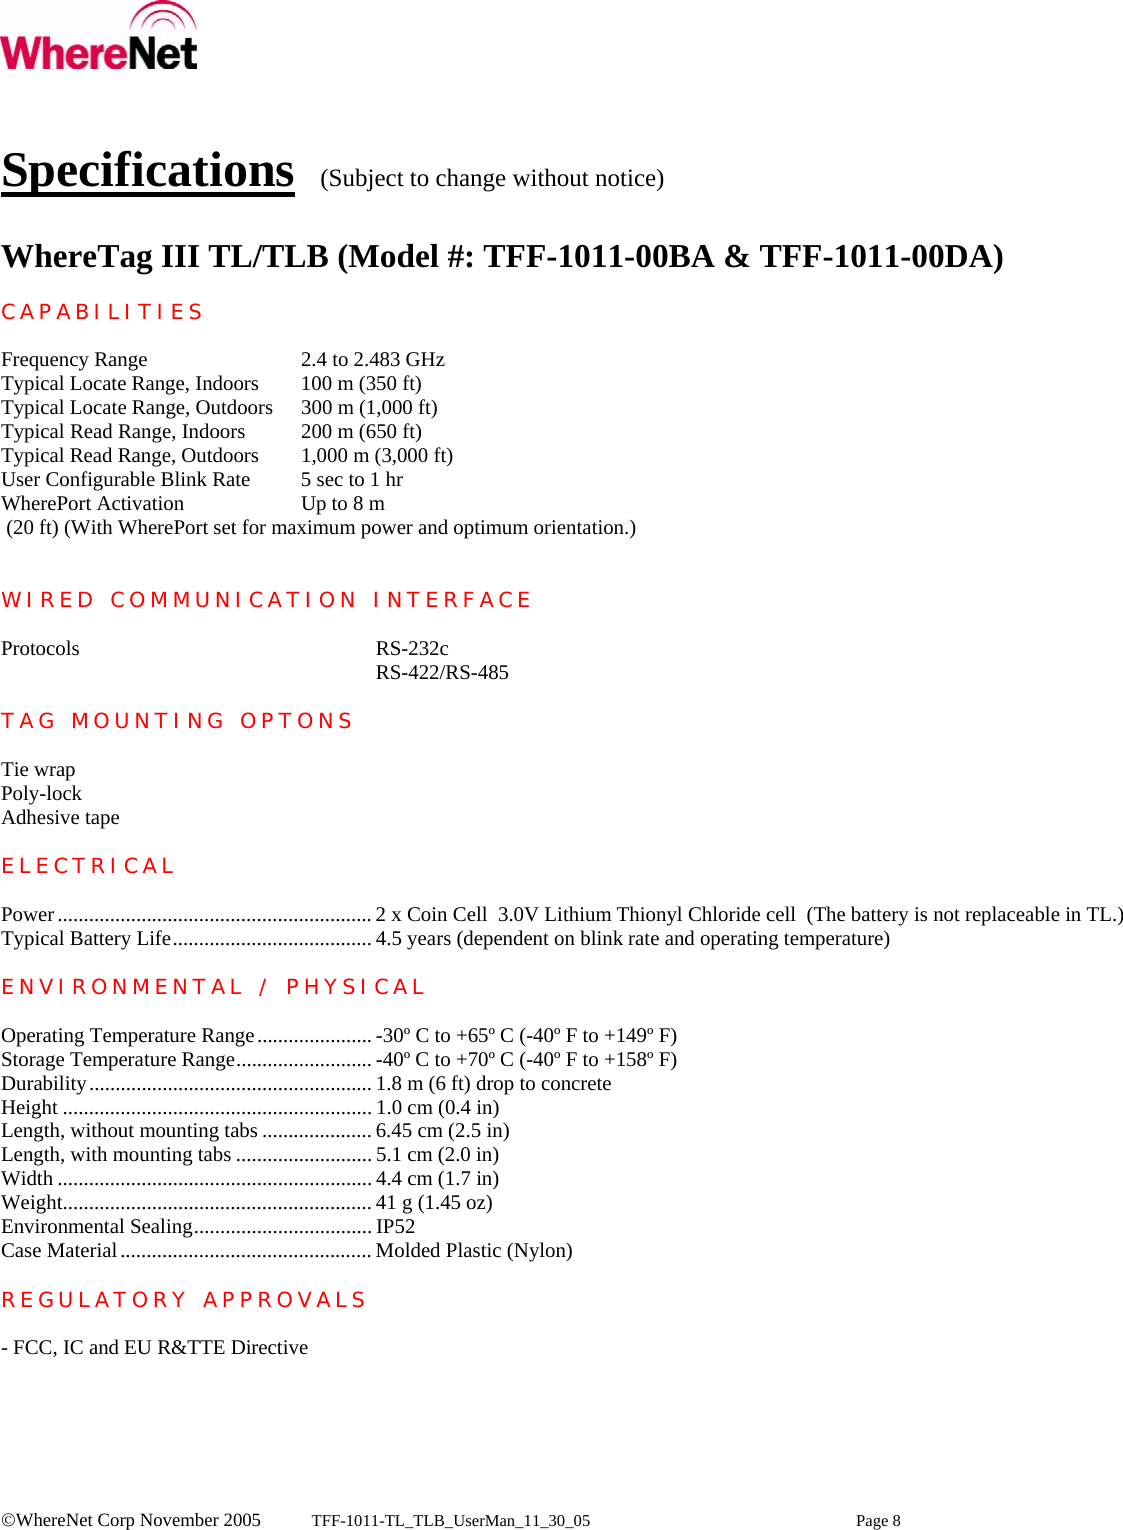    ©WhereNet Corp November 2005  TFF-1011-TL_TLB_UserMan_11_30_05 Page 8   Specifications  (Subject to change without notice)  WhereTag III TL/TLB (Model #: TFF-1011-00BA &amp; TFF-1011-00DA)  CAPABILITIES  Frequency Range     2.4 to 2.483 GHz Typical Locate Range, Indoors  100 m (350 ft) Typical Locate Range, Outdoors  300 m (1,000 ft) Typical Read Range, Indoors  200 m (650 ft) Typical Read Range, Outdoors  1,000 m (3,000 ft) User Configurable Blink Rate  5 sec to 1 hr WherePort Activation    Up to 8 m   (20 ft) (With WherePort set for maximum power and optimum orientation.)   WIRED COMMUNICATION INTERFACE  Protocols    RS-232c      RS-422/RS-485  TAG MOUNTING OPTONS  Tie wrap Poly-lock Adhesive tape  ELECTRICAL  Power............................................................ 2 x Coin Cell  3.0V Lithium Thionyl Chloride cell  (The battery is not replaceable in TL.) Typical Battery Life...................................... 4.5 years (dependent on blink rate and operating temperature)  ENVIRONMENTAL / PHYSICAL  Operating Temperature Range...................... -30º C to +65º C (-40º F to +149º F) Storage Temperature Range.......................... -40º C to +70º C (-40º F to +158º F) Durability...................................................... 1.8 m (6 ft) drop to concrete Height ........................................................... 1.0 cm (0.4 in) Length, without mounting tabs ..................... 6.45 cm (2.5 in) Length, with mounting tabs .......................... 5.1 cm (2.0 in) Width ............................................................ 4.4 cm (1.7 in) Weight........................................................... 41 g (1.45 oz) Environmental Sealing.................................. IP52  Case Material................................................ Molded Plastic (Nylon)  REGULATORY APPROVALS  - FCC, IC and EU R&amp;TTE Directive   